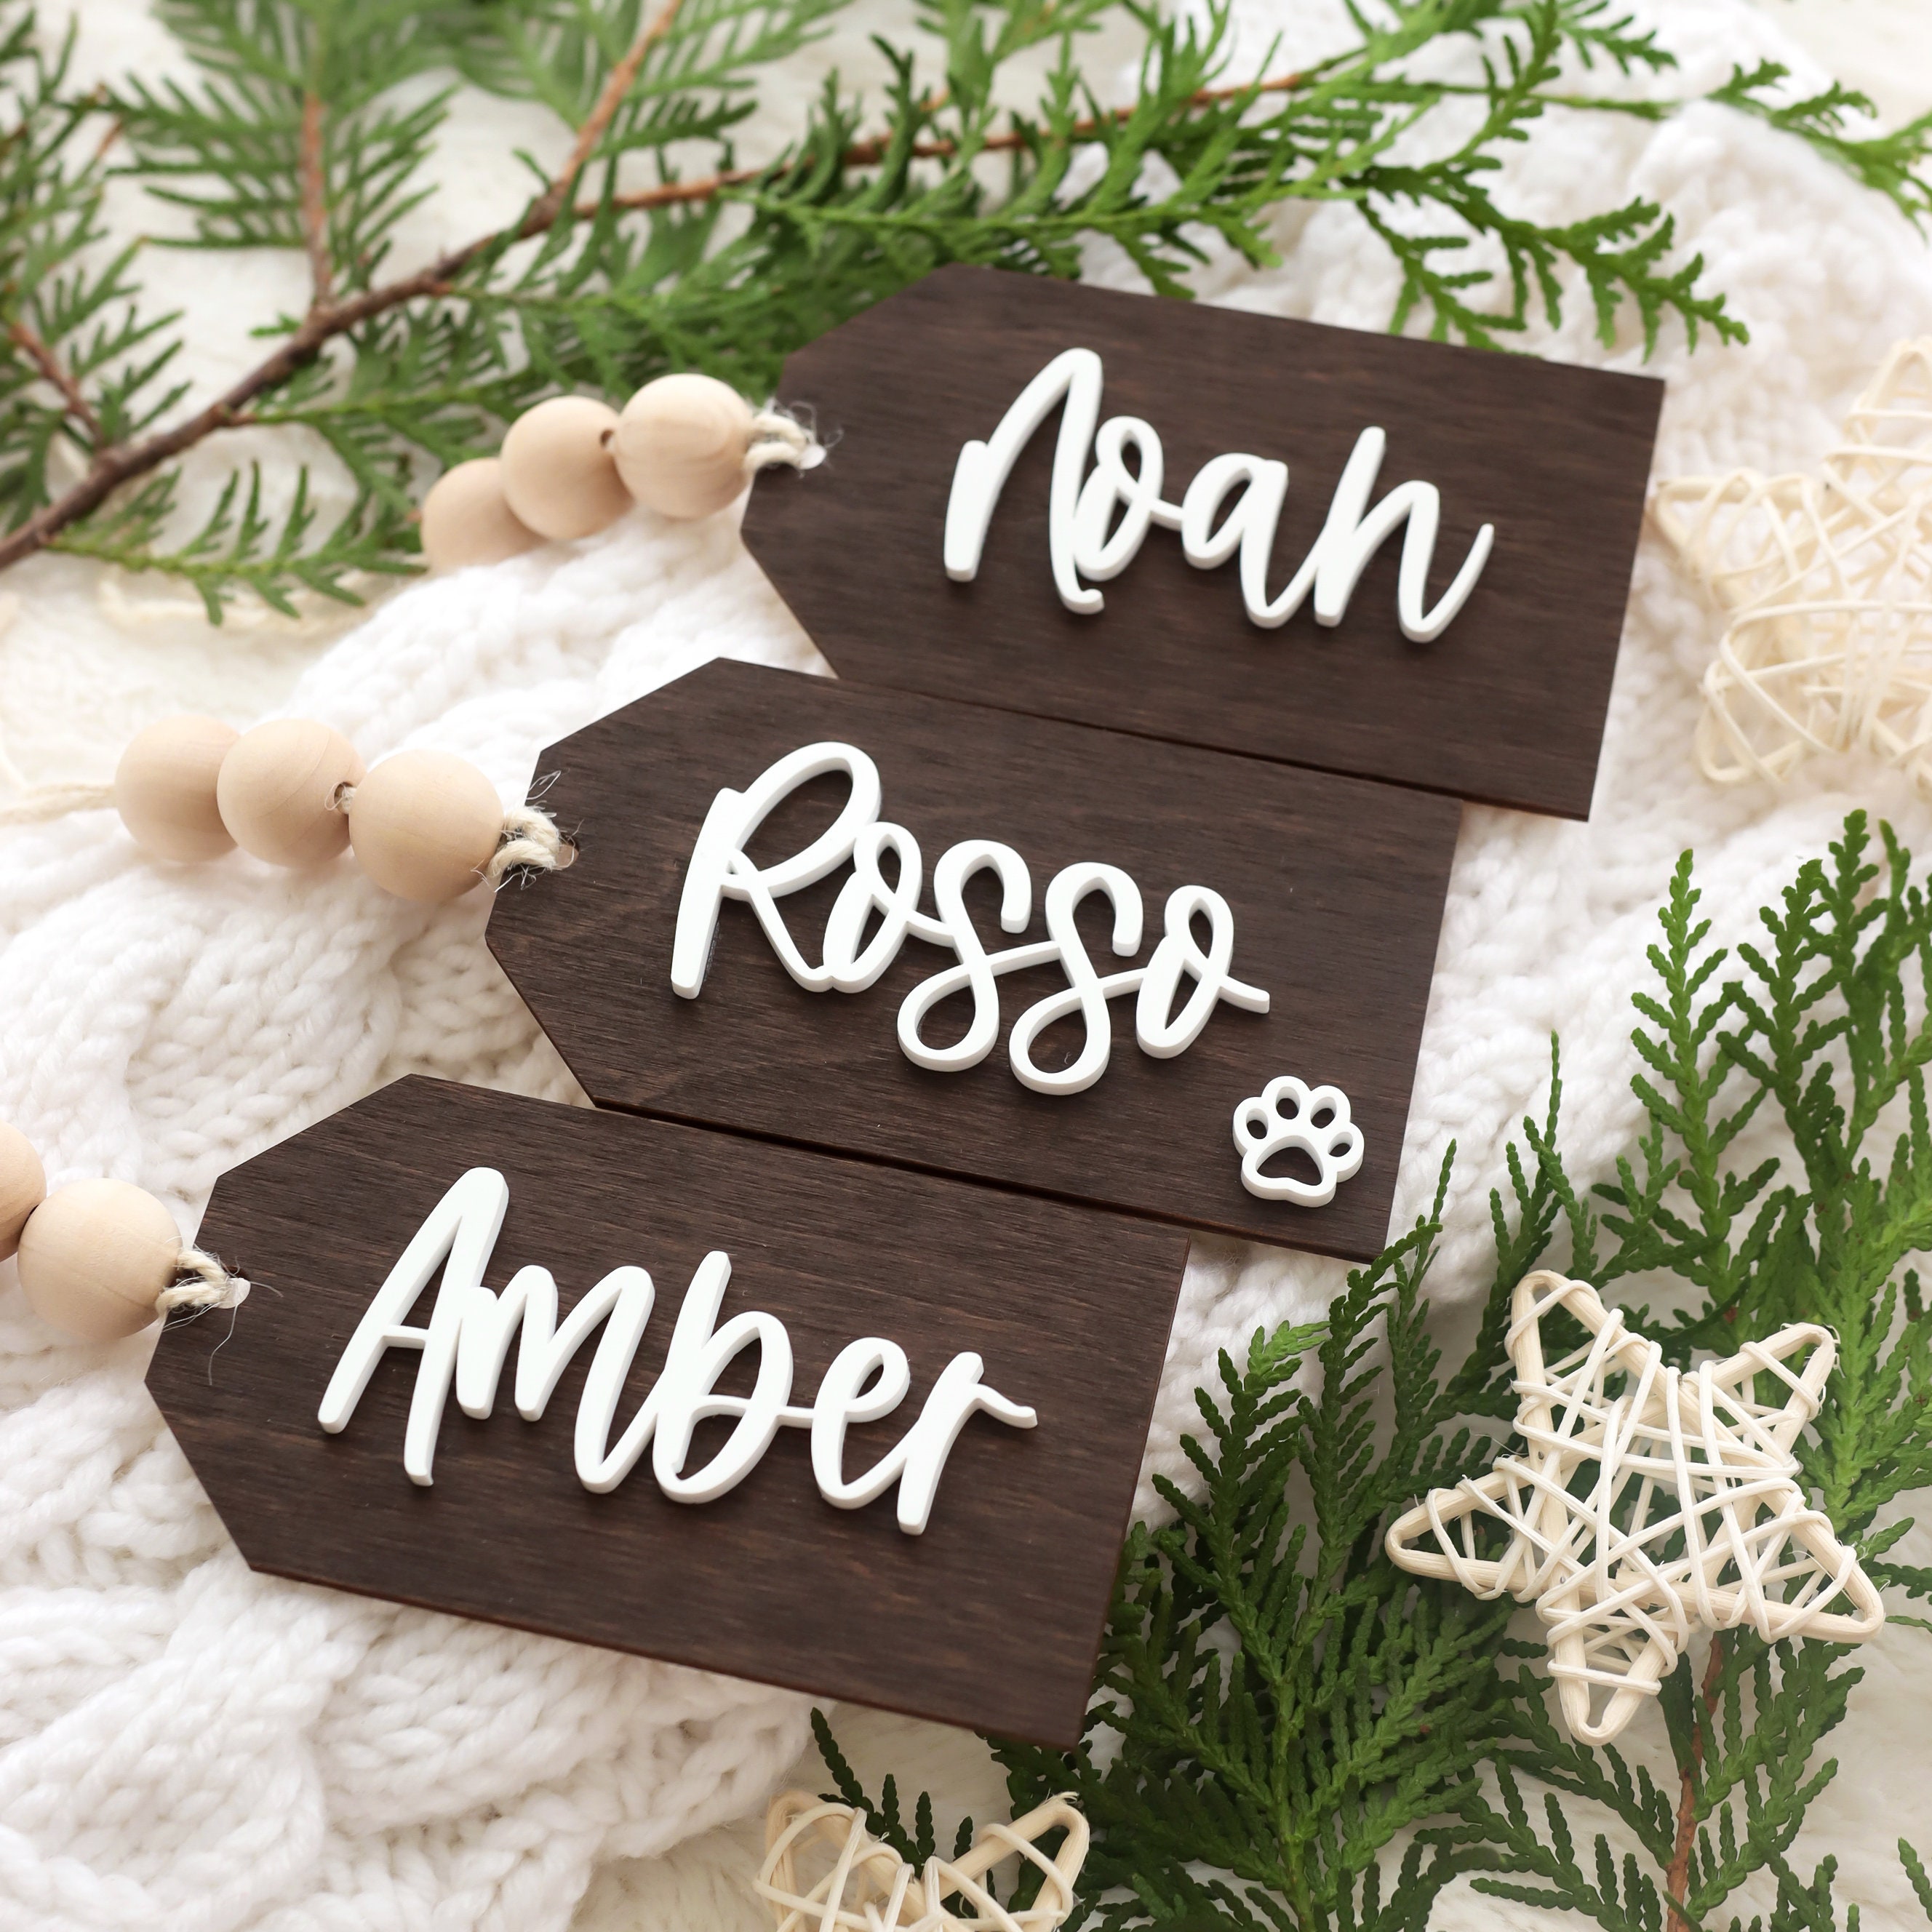 Christmas Stockings Name Tags Wooden Names for Stocking, Family  Personalized Stocking Tag Decor for Holidays, Rustic Chic item STS200 